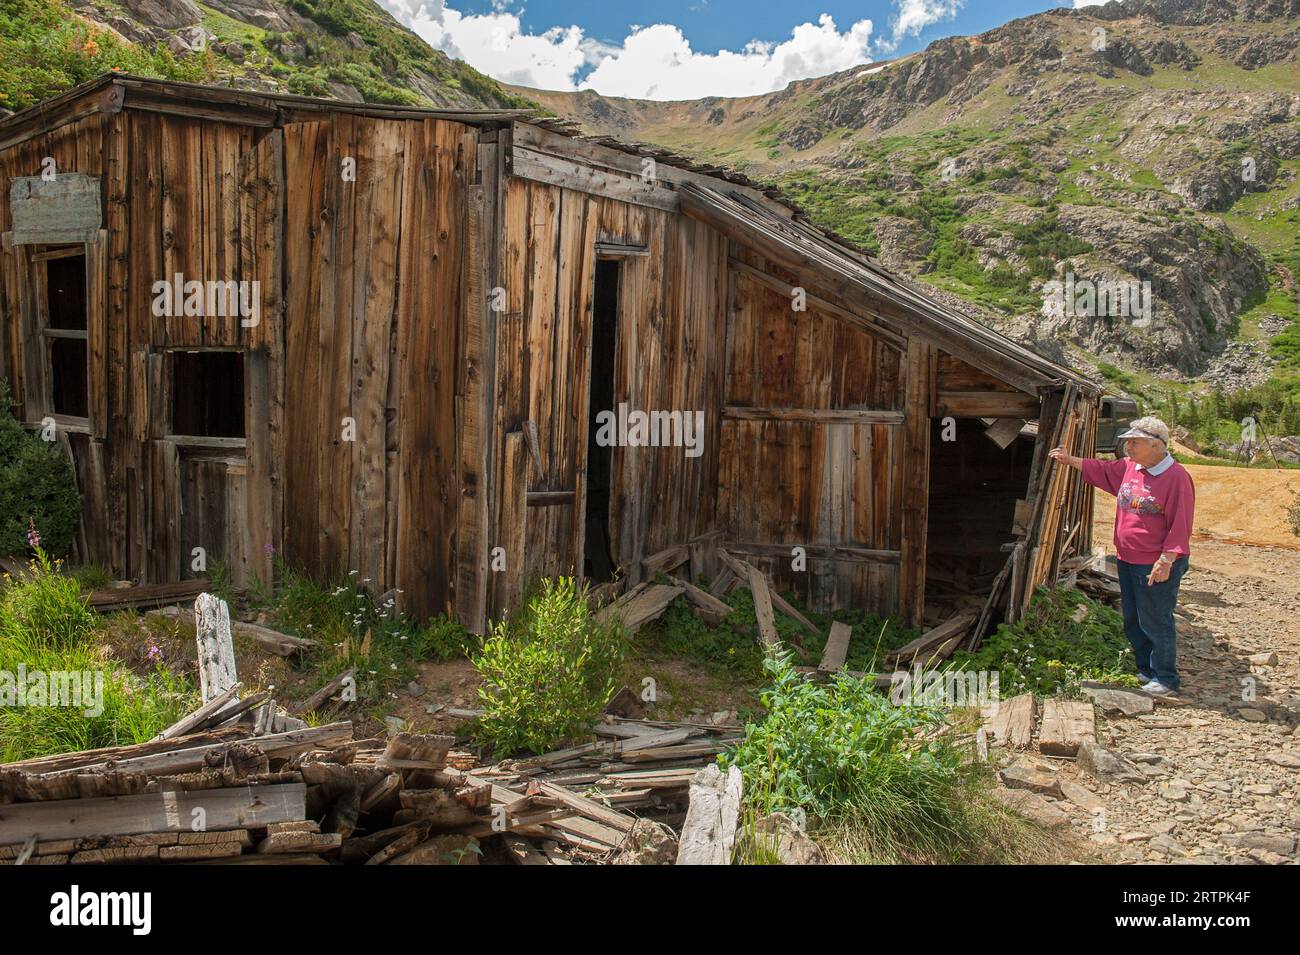 An elderly woman from South Park inspects the ruins of a miner's cabin at the historic Missouri Mine near Bailey, Colorado Stock Photo